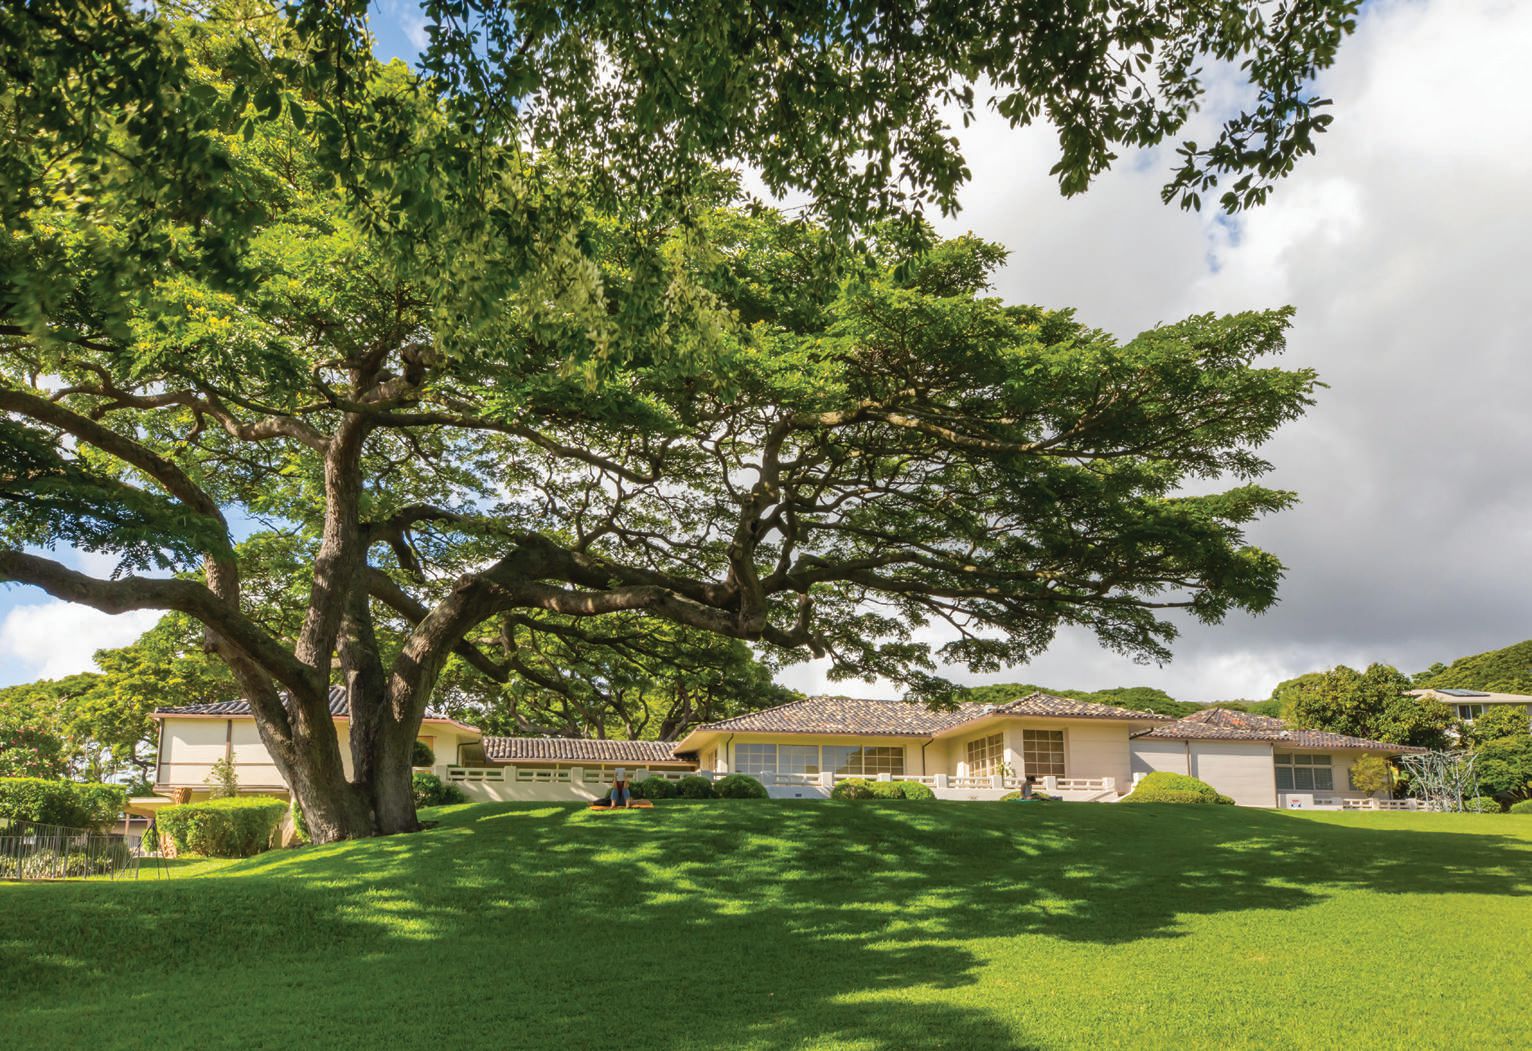 The Spalding House, formerly known as the Honolulu Museum of Art, is on the market HOME PHOTO COURTESY OF RUTHIE KAMINSKAS
